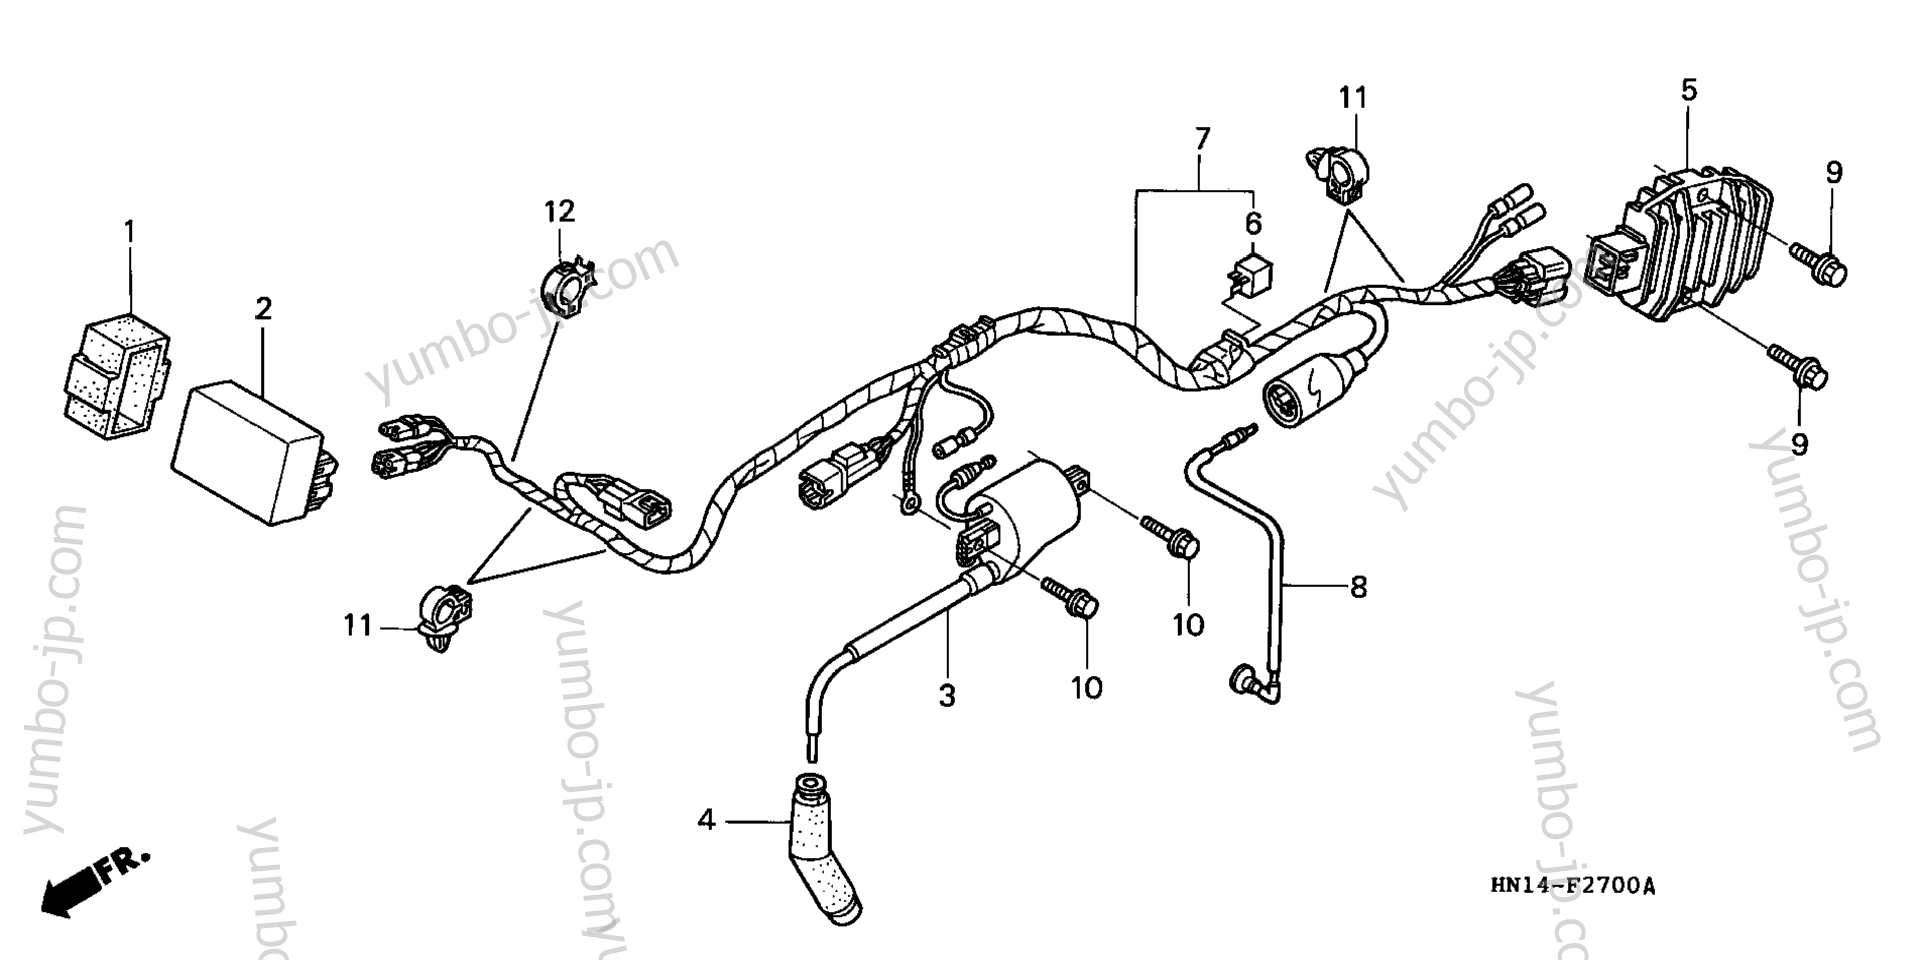 WIRE HARNESS ('99-'04) for ATVs HONDA TRX400EX A 2004 year